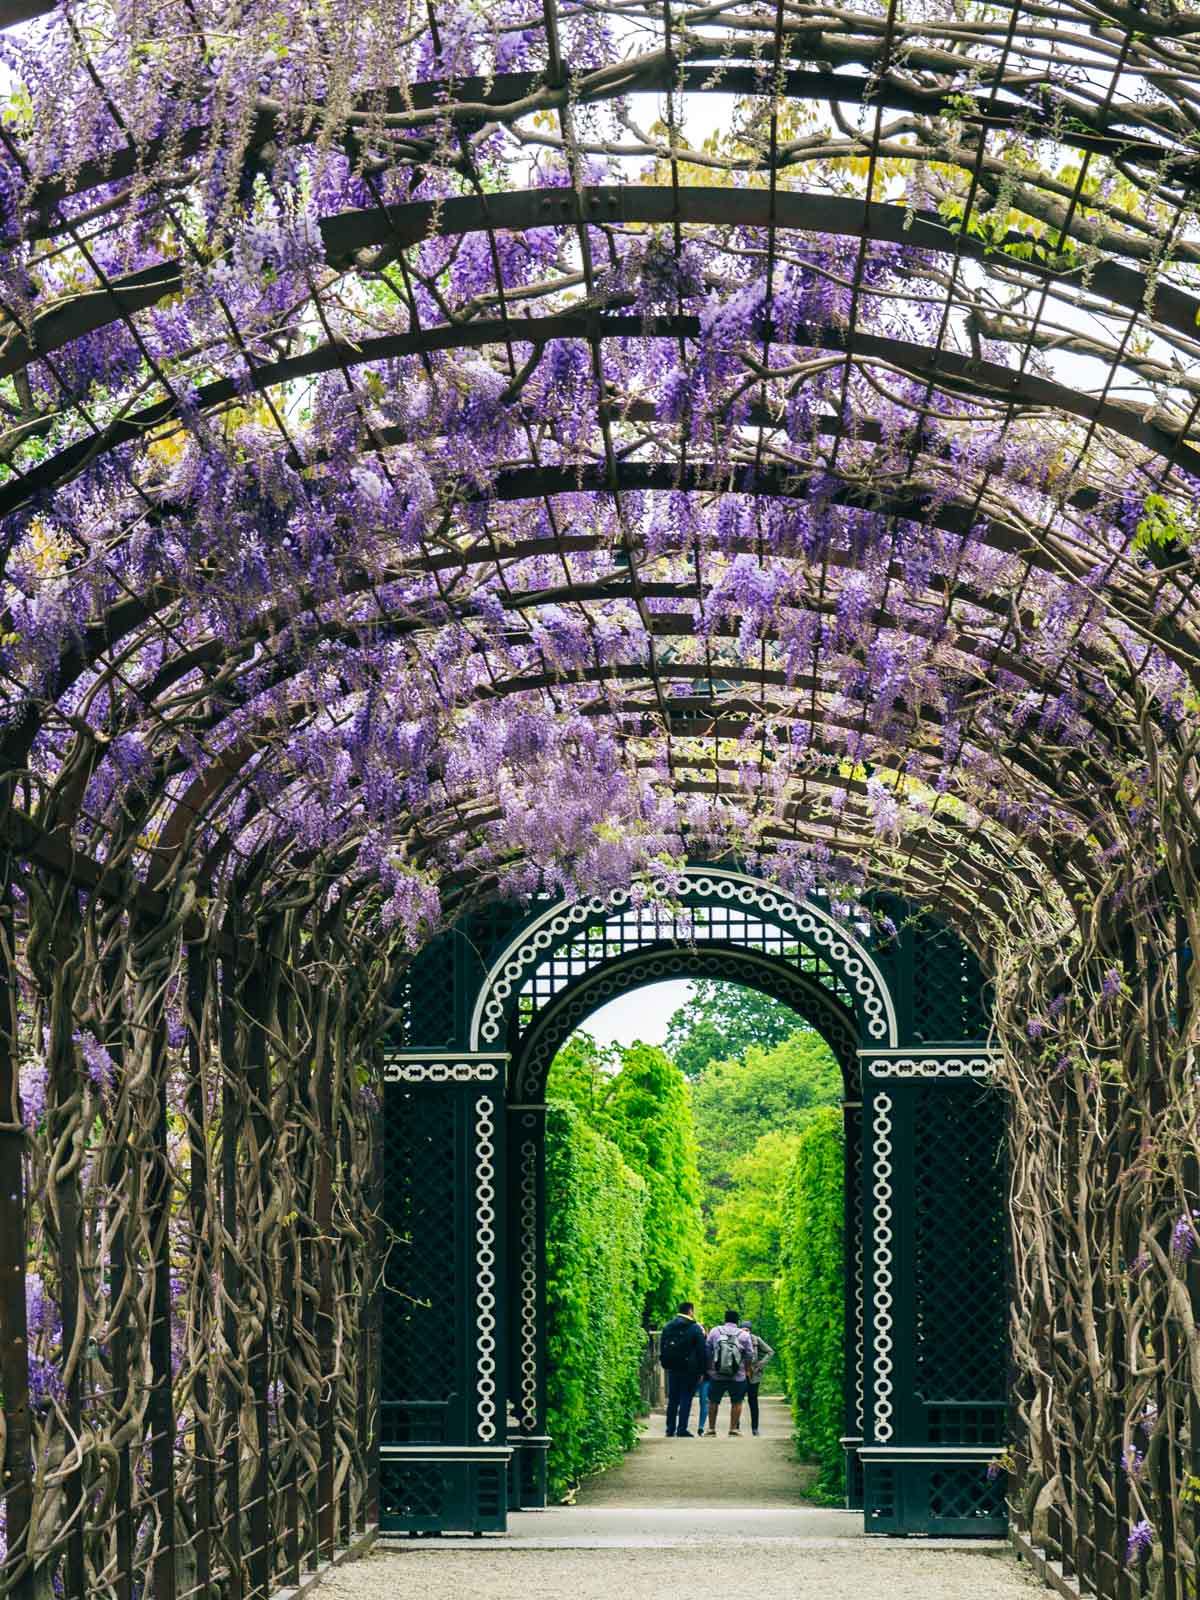 Garden archway covered in blooming wisteria and vines with view of hedge maze in distance.